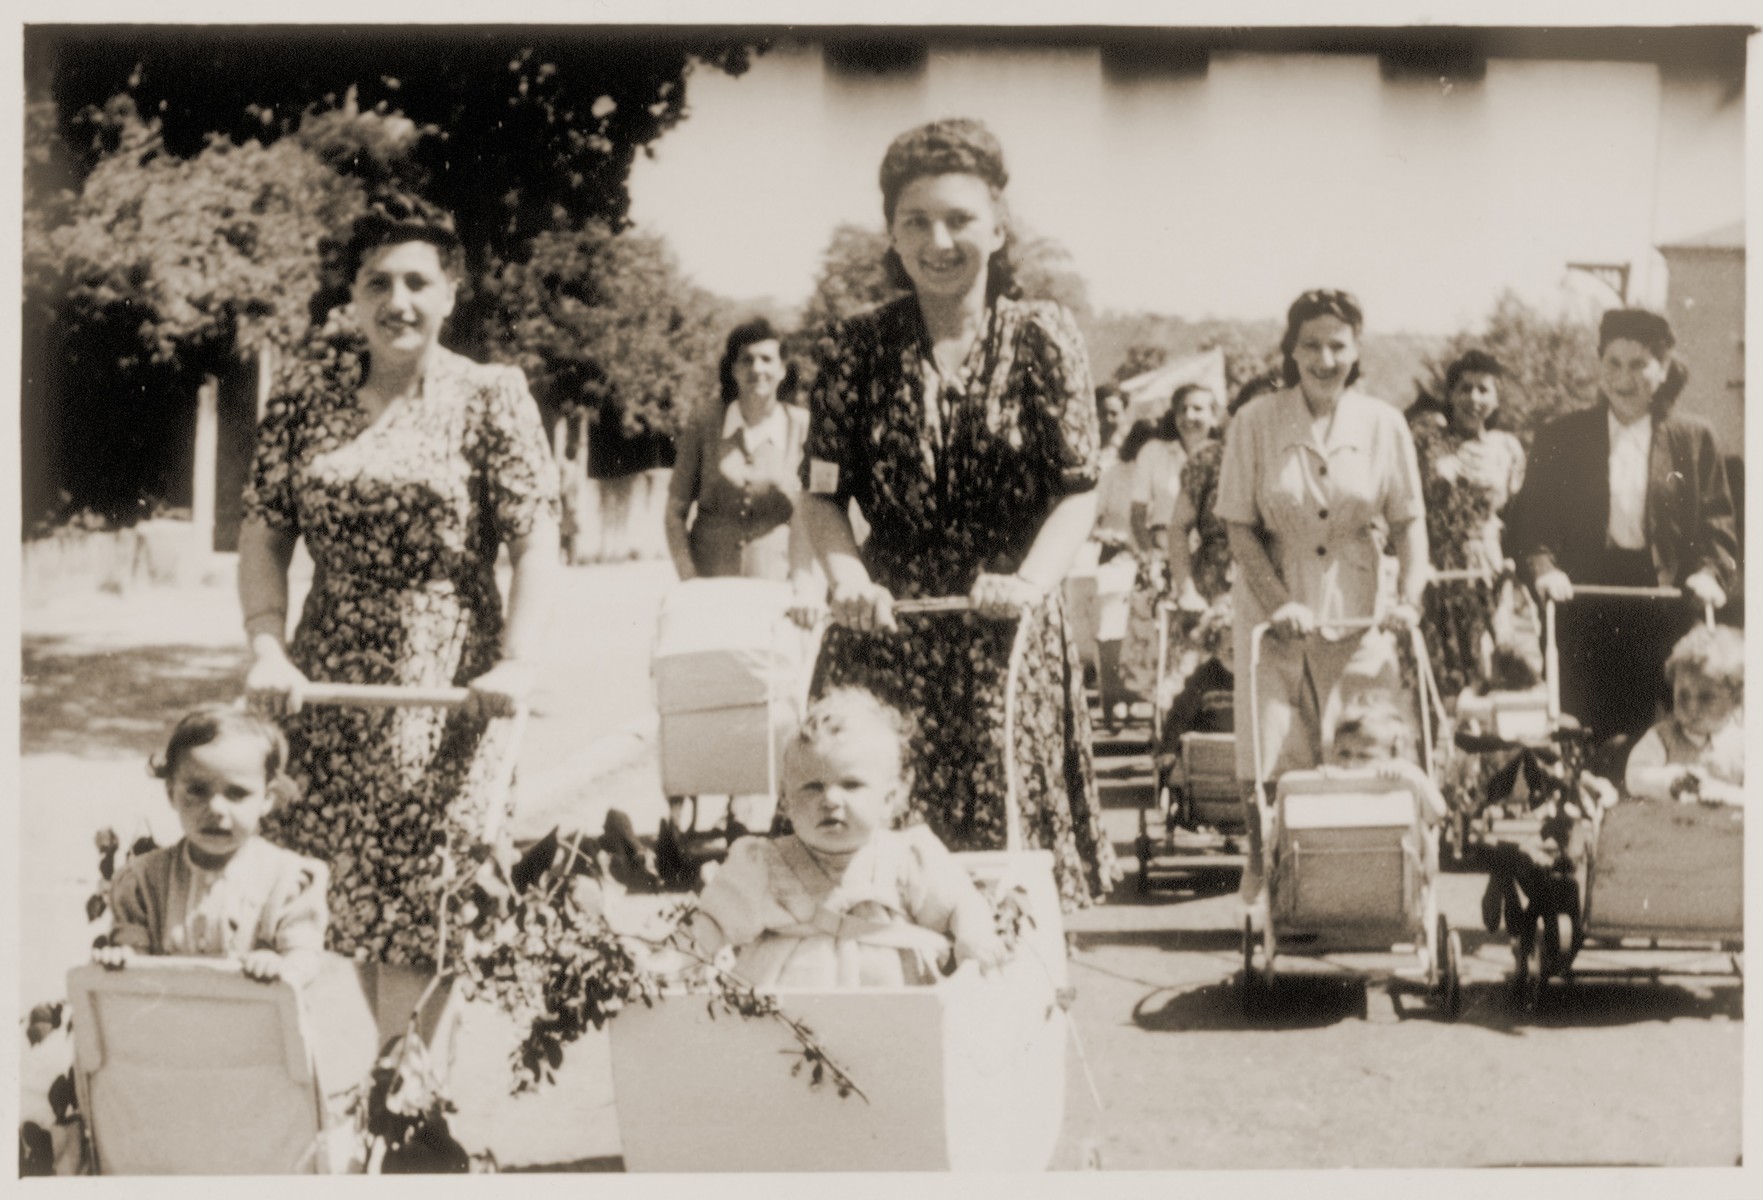 Young mothers take their babies for a stroll in the Landsberg DP camp.  

Dorit Mandelbaum is pictured in the baby carriage on the left.  Her mother, Anka, is pushing the carriage.  Chava Oppenheim pushes her son Aviezer in the carriage, third from the right.  Also pictured is Laja Minc.